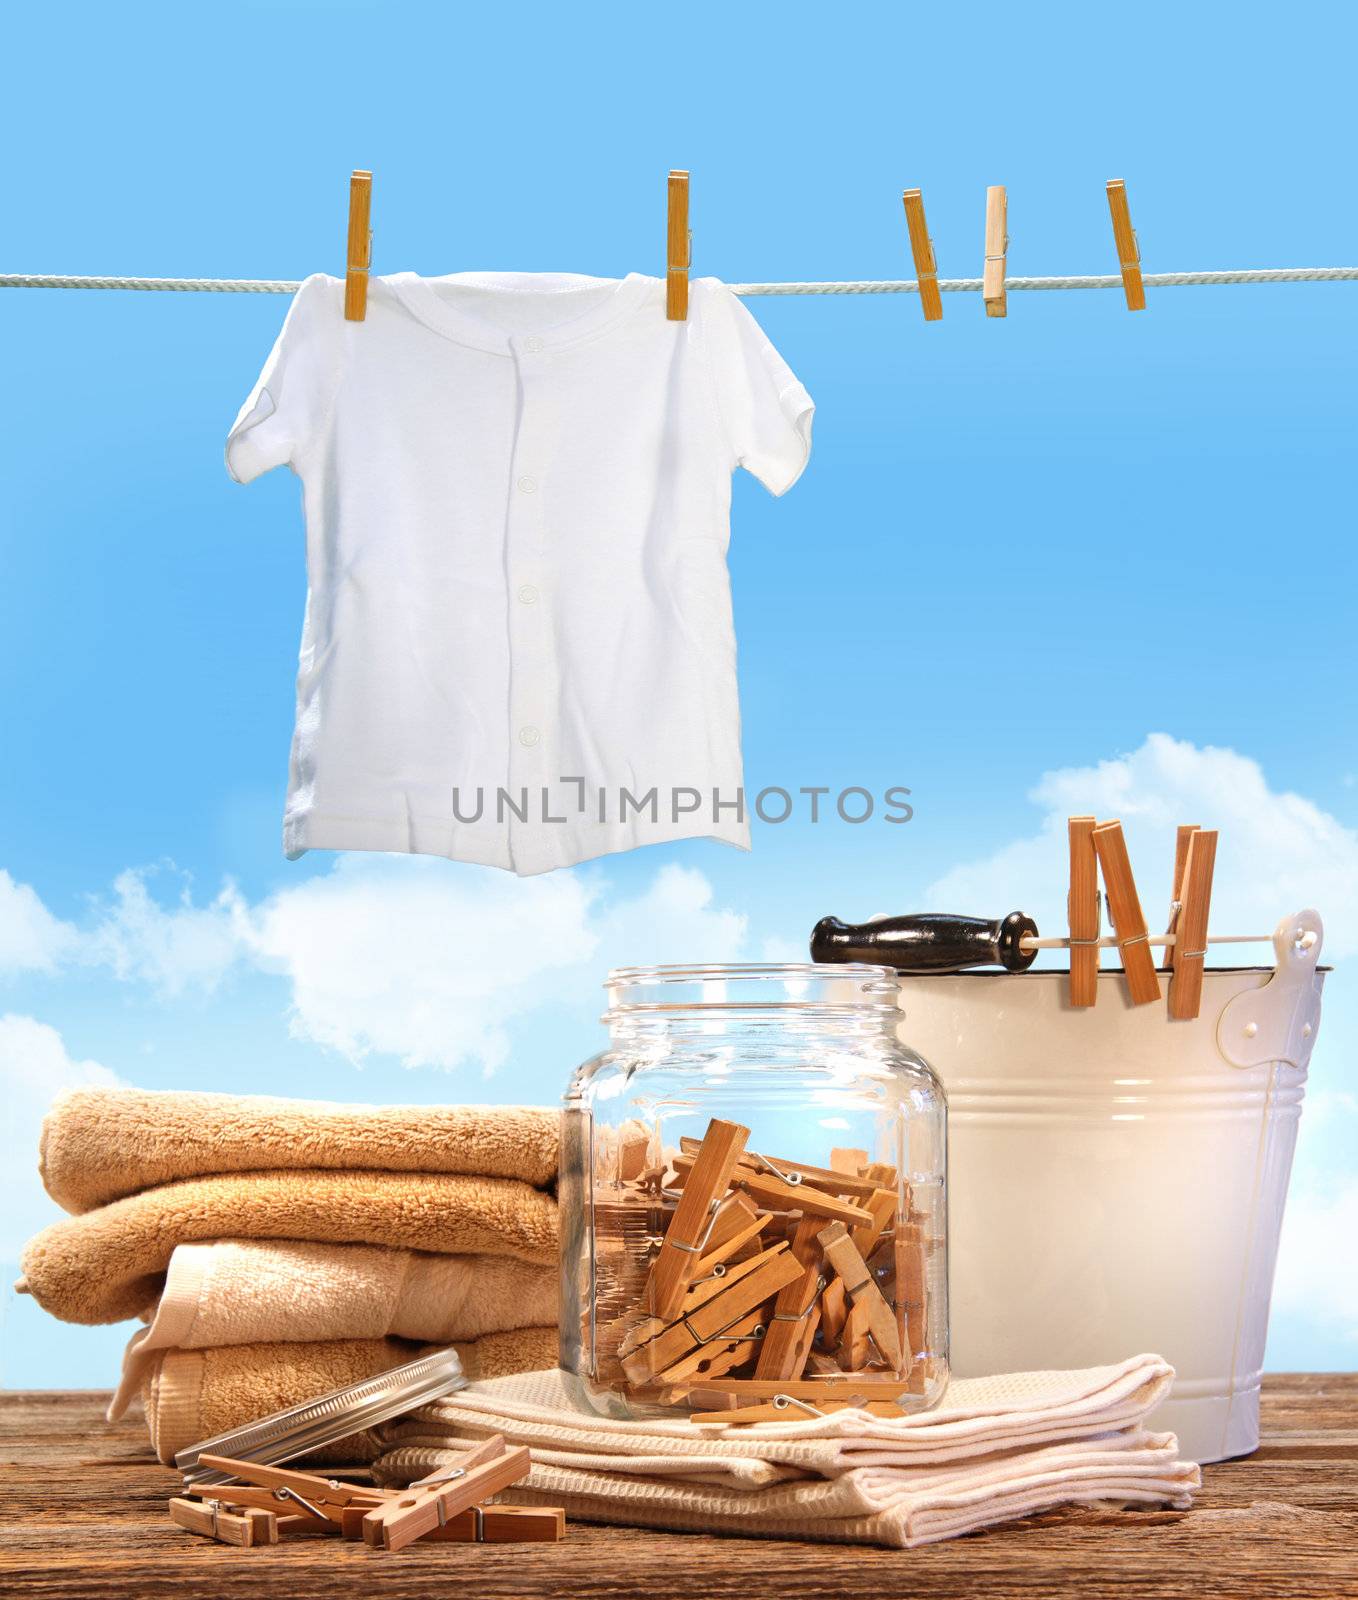 Laundry day with towels and t-shirt on clothesline